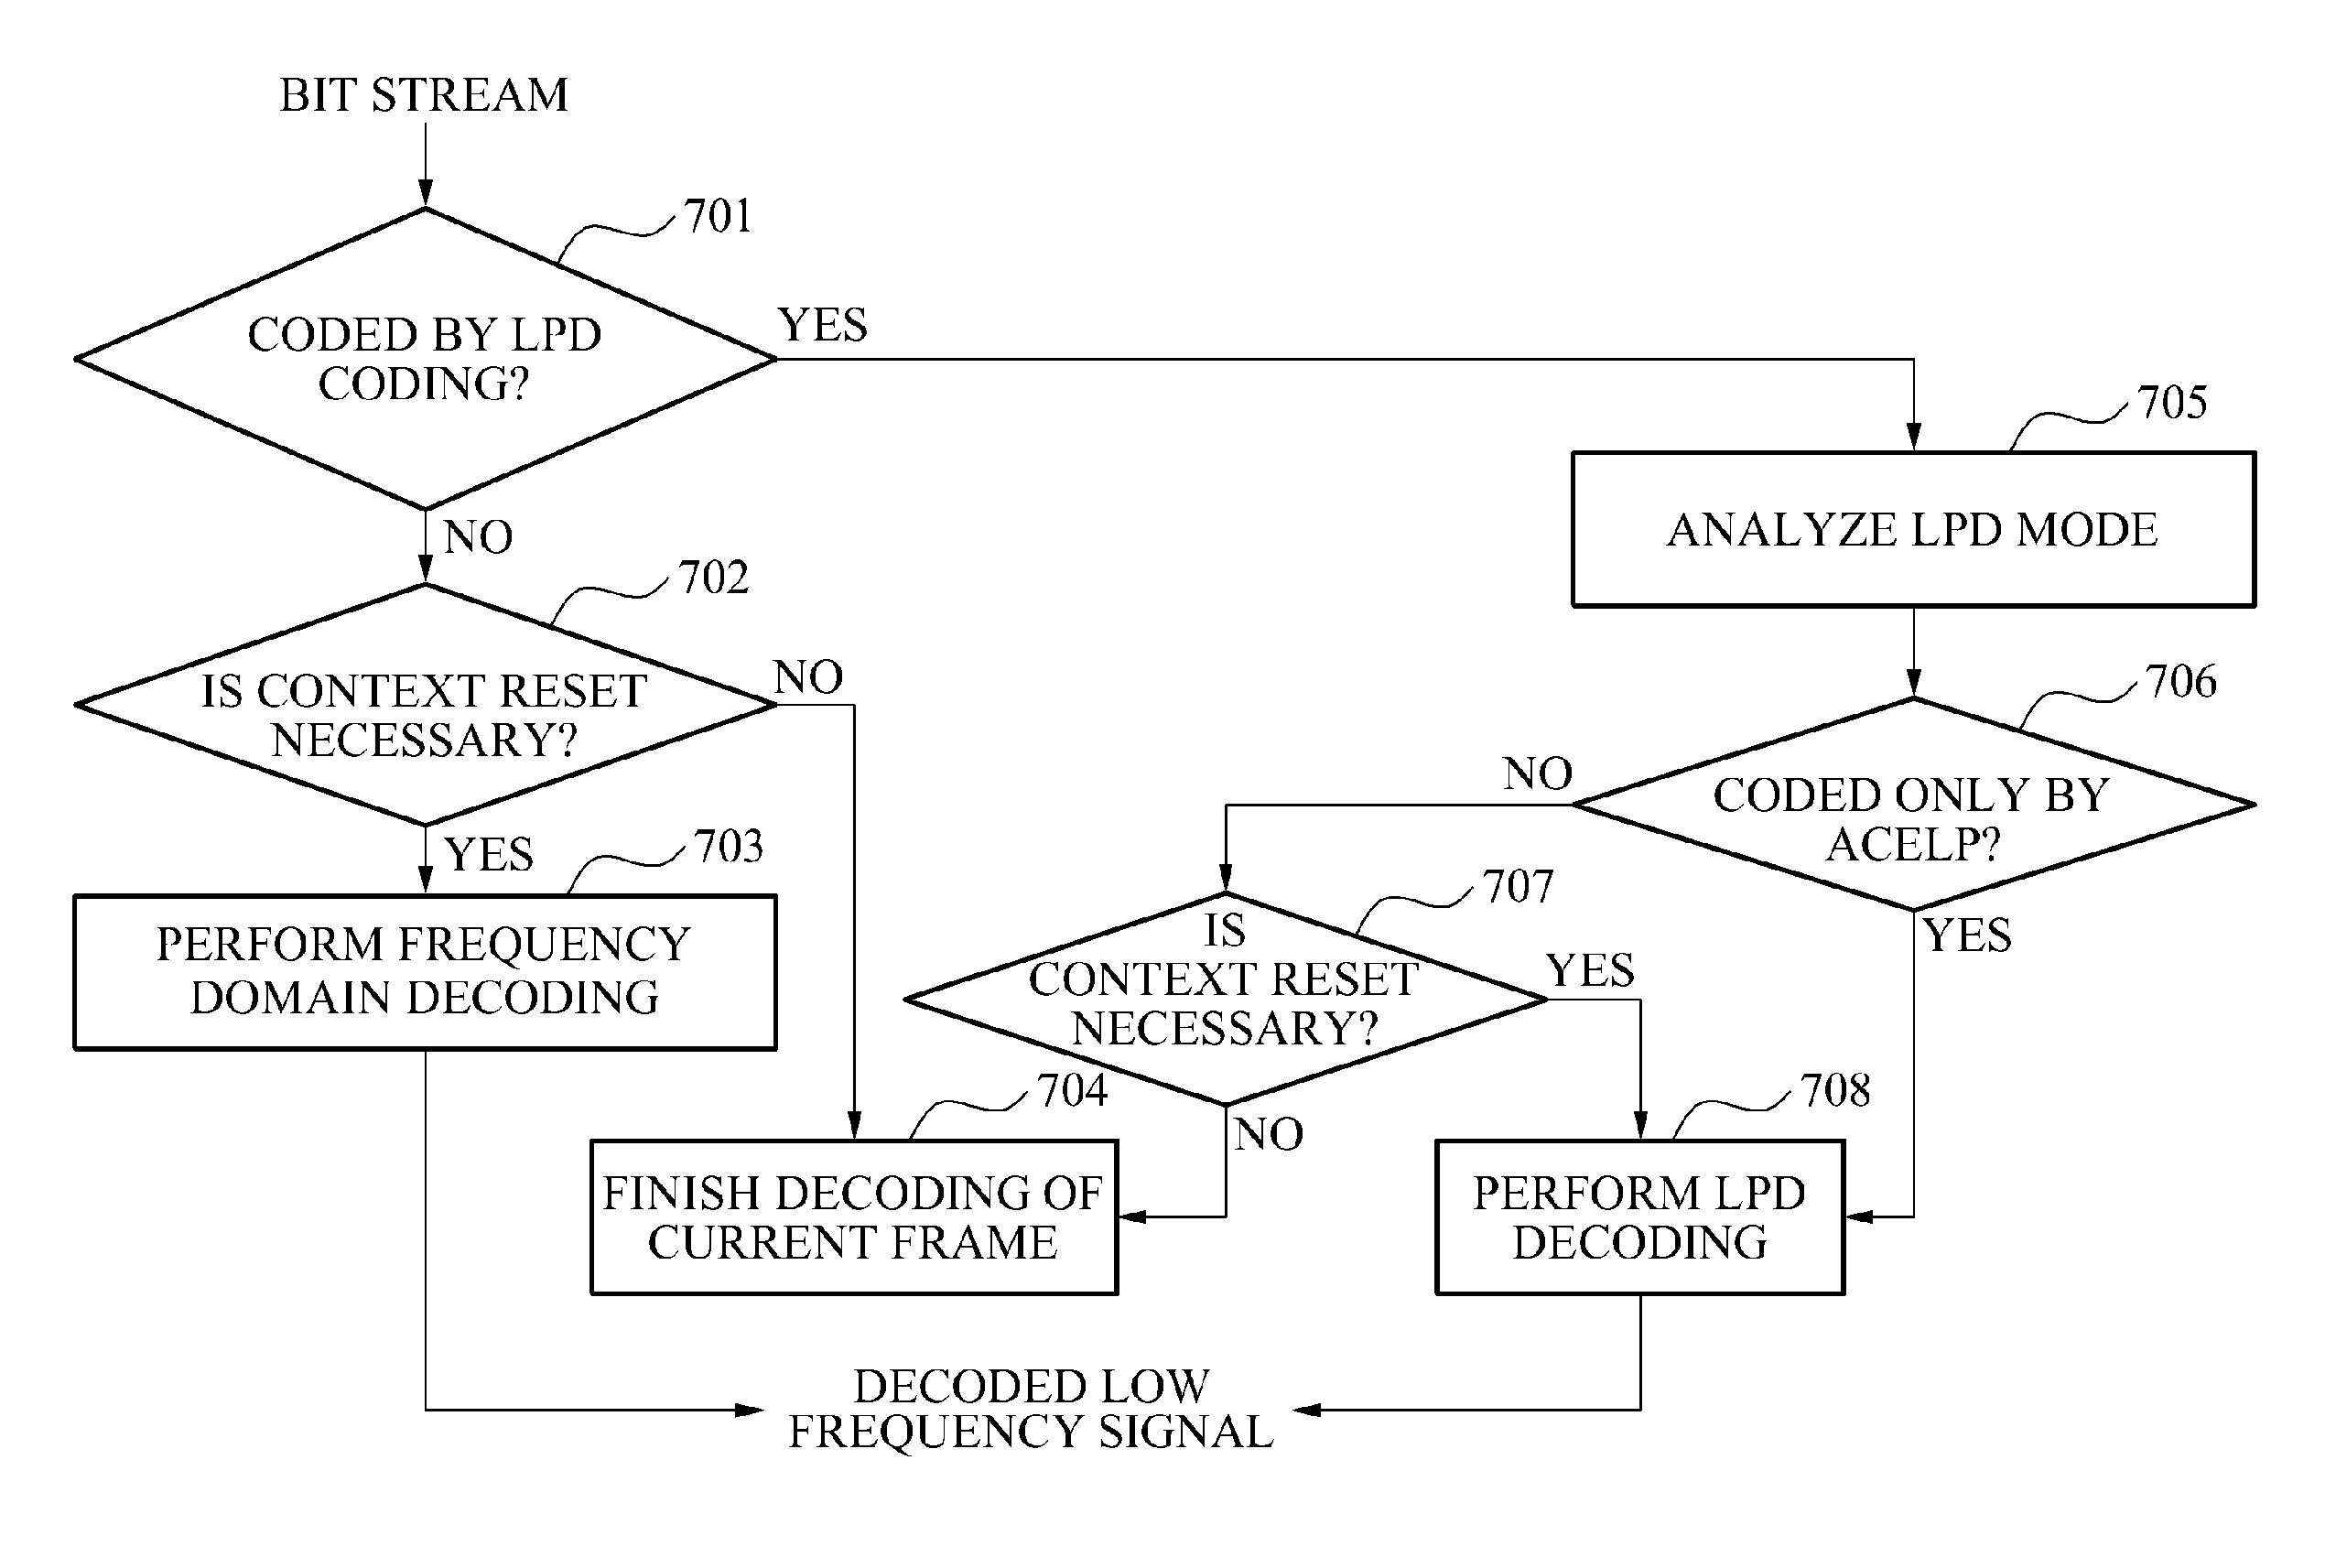 Method for decoding an audio signal based on coding mode and context flag